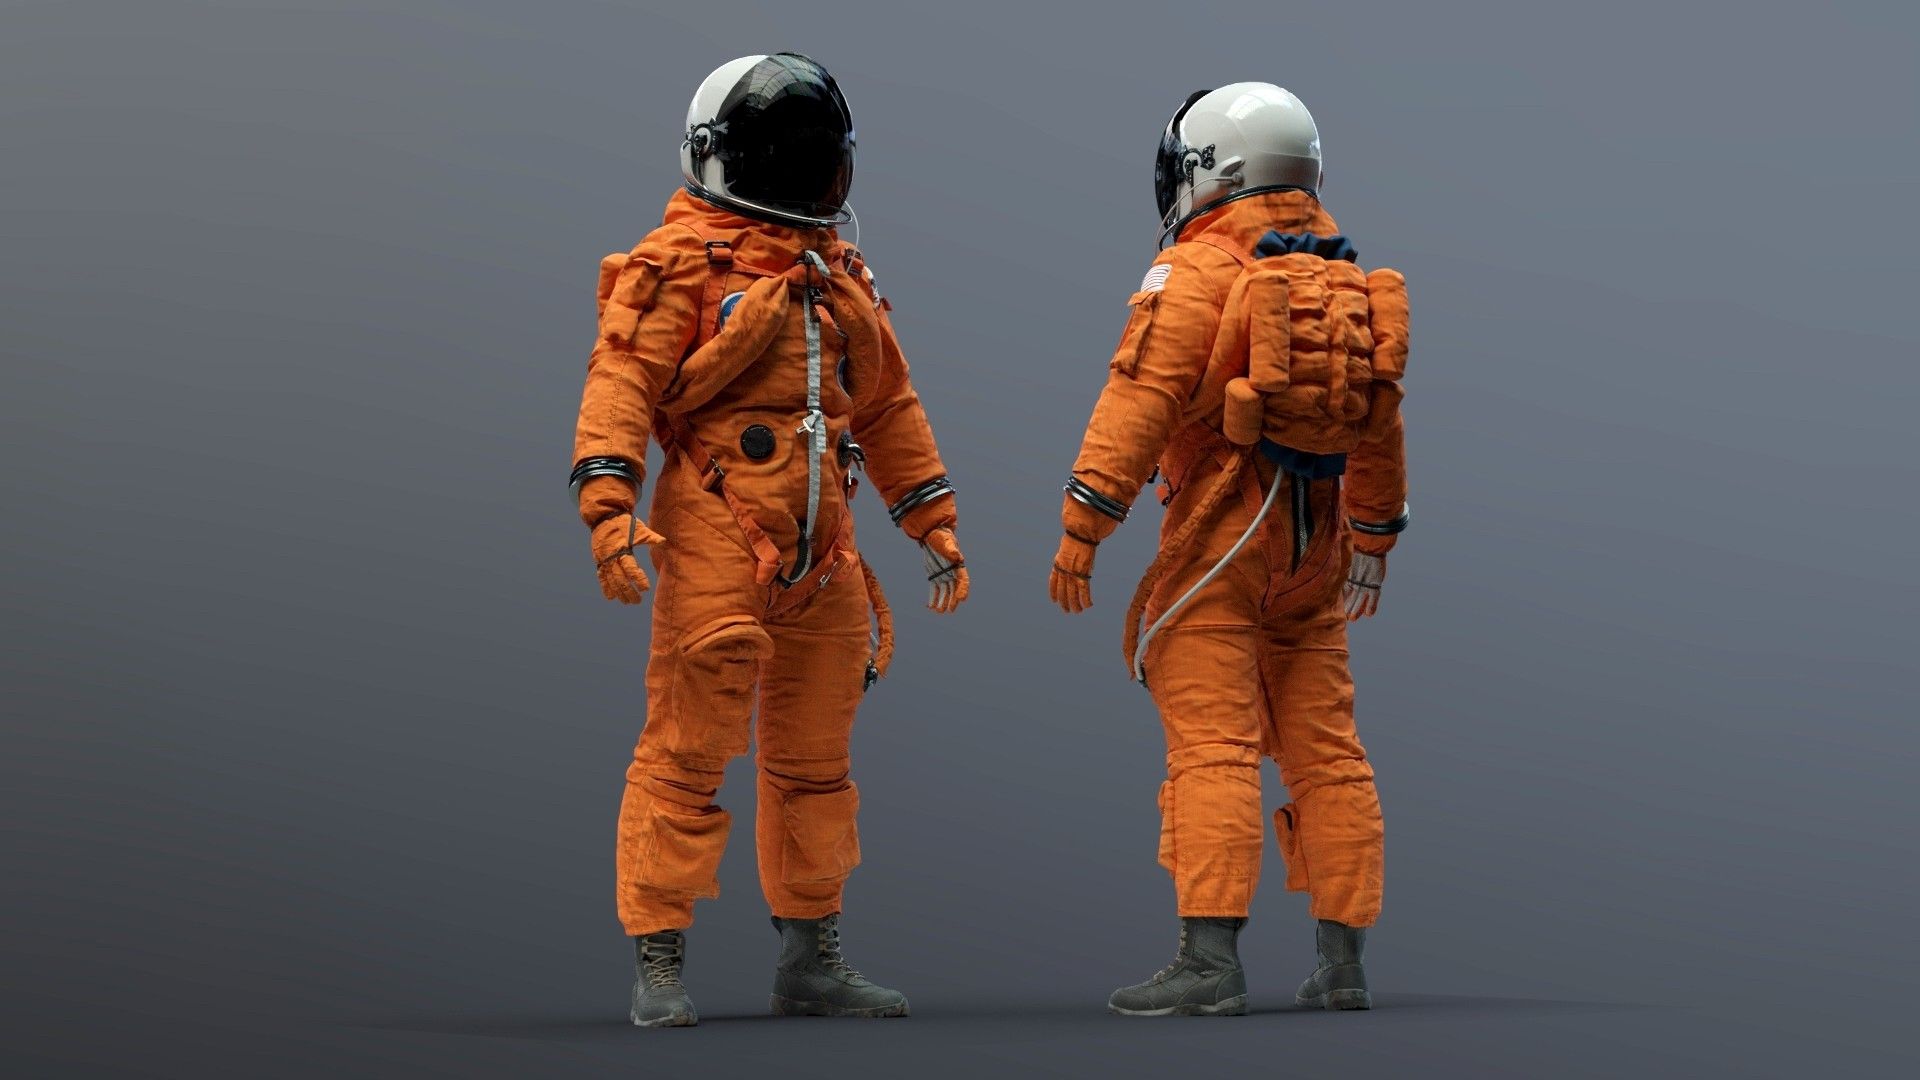 The First Spacesuits on the Moon Were Inspired by Girdle Technology - Racked